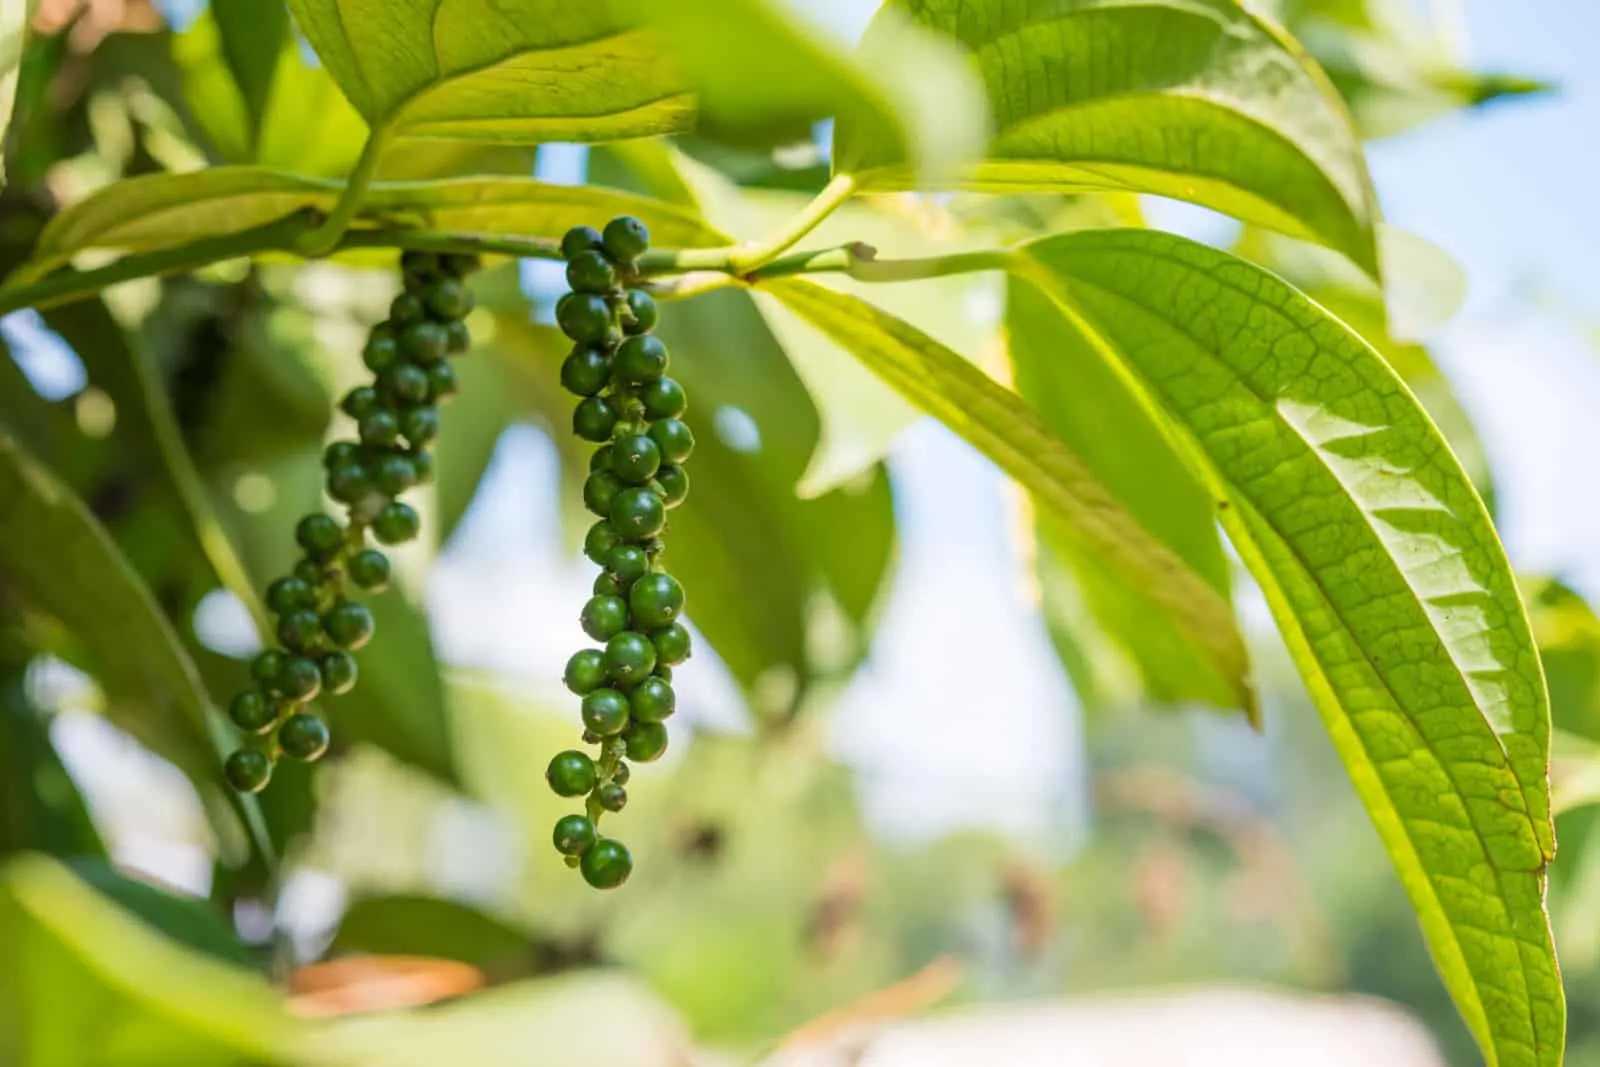 Black pepper - plant with green berries and leaves